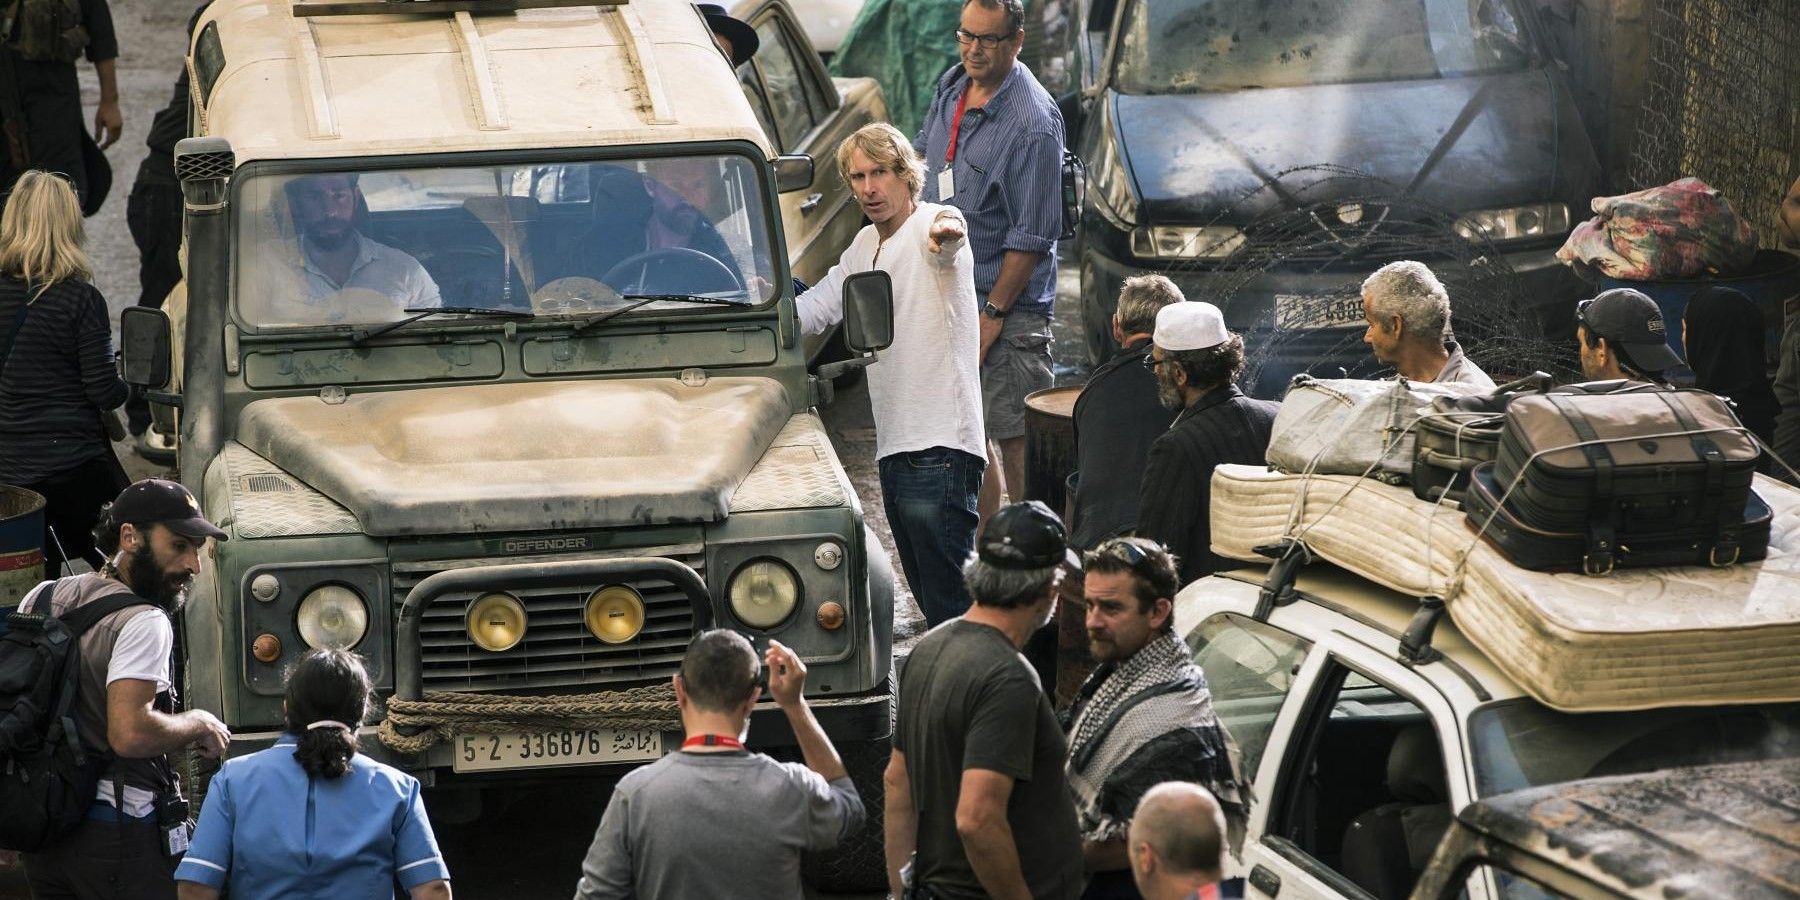 Michael Bay The 5 Best Movies He Directed (& 5 He Produced) According To Rotten Tomatoes